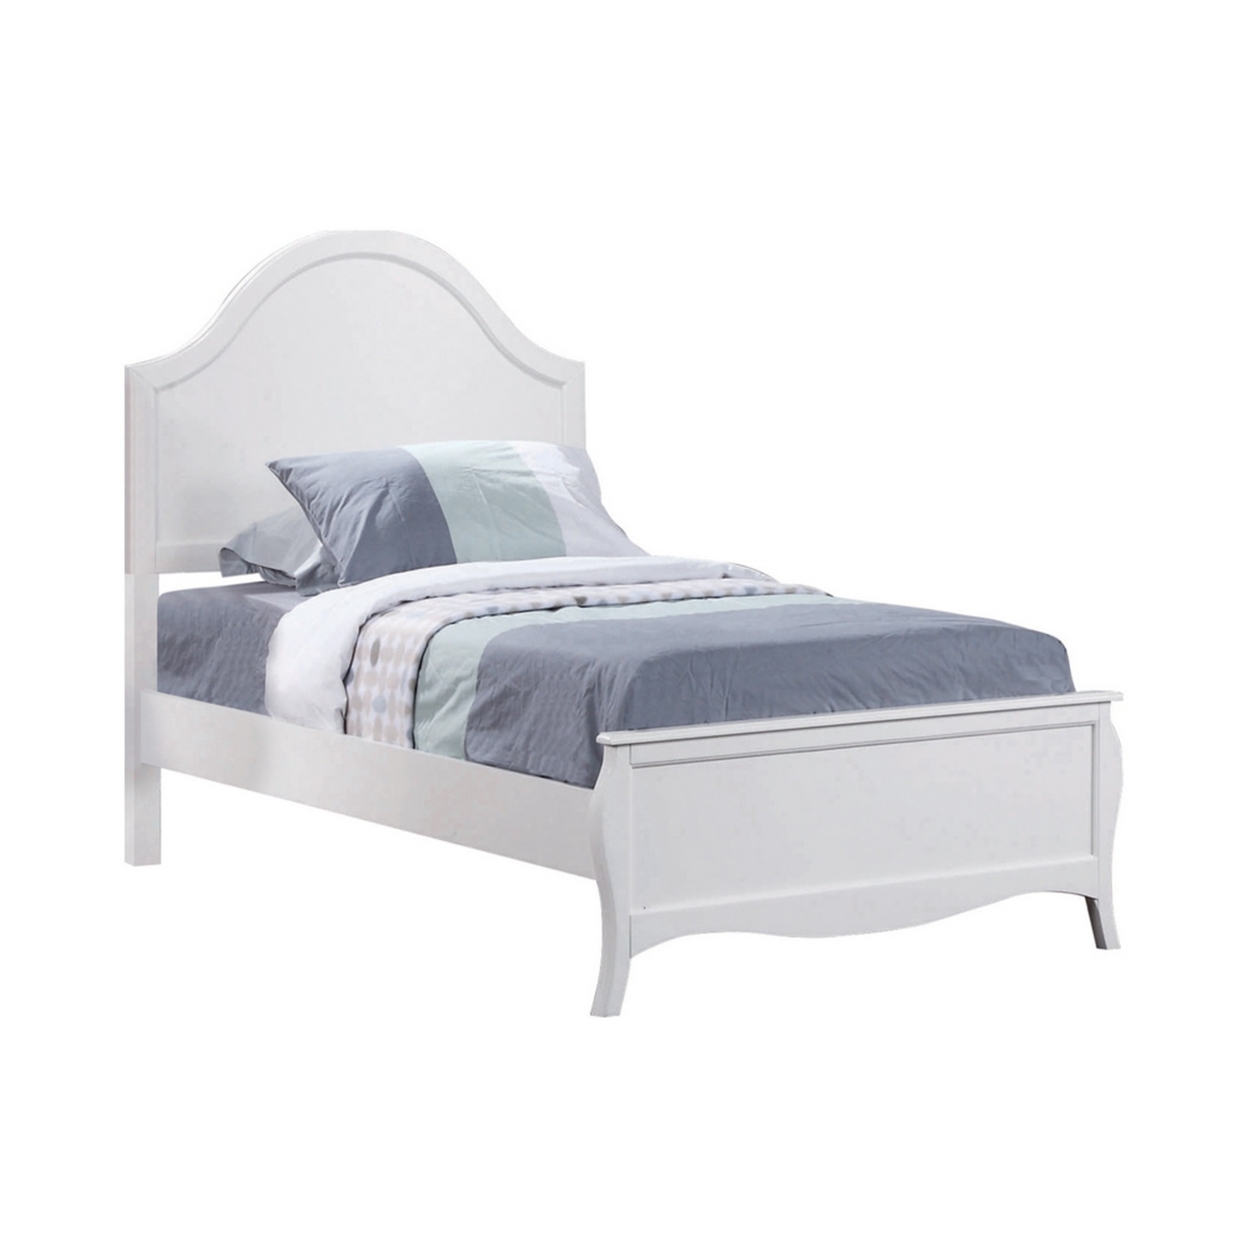 Wooden Twin Size Bed With Camelback Headboard And Flared Legs, White- Saltoro Sherpi